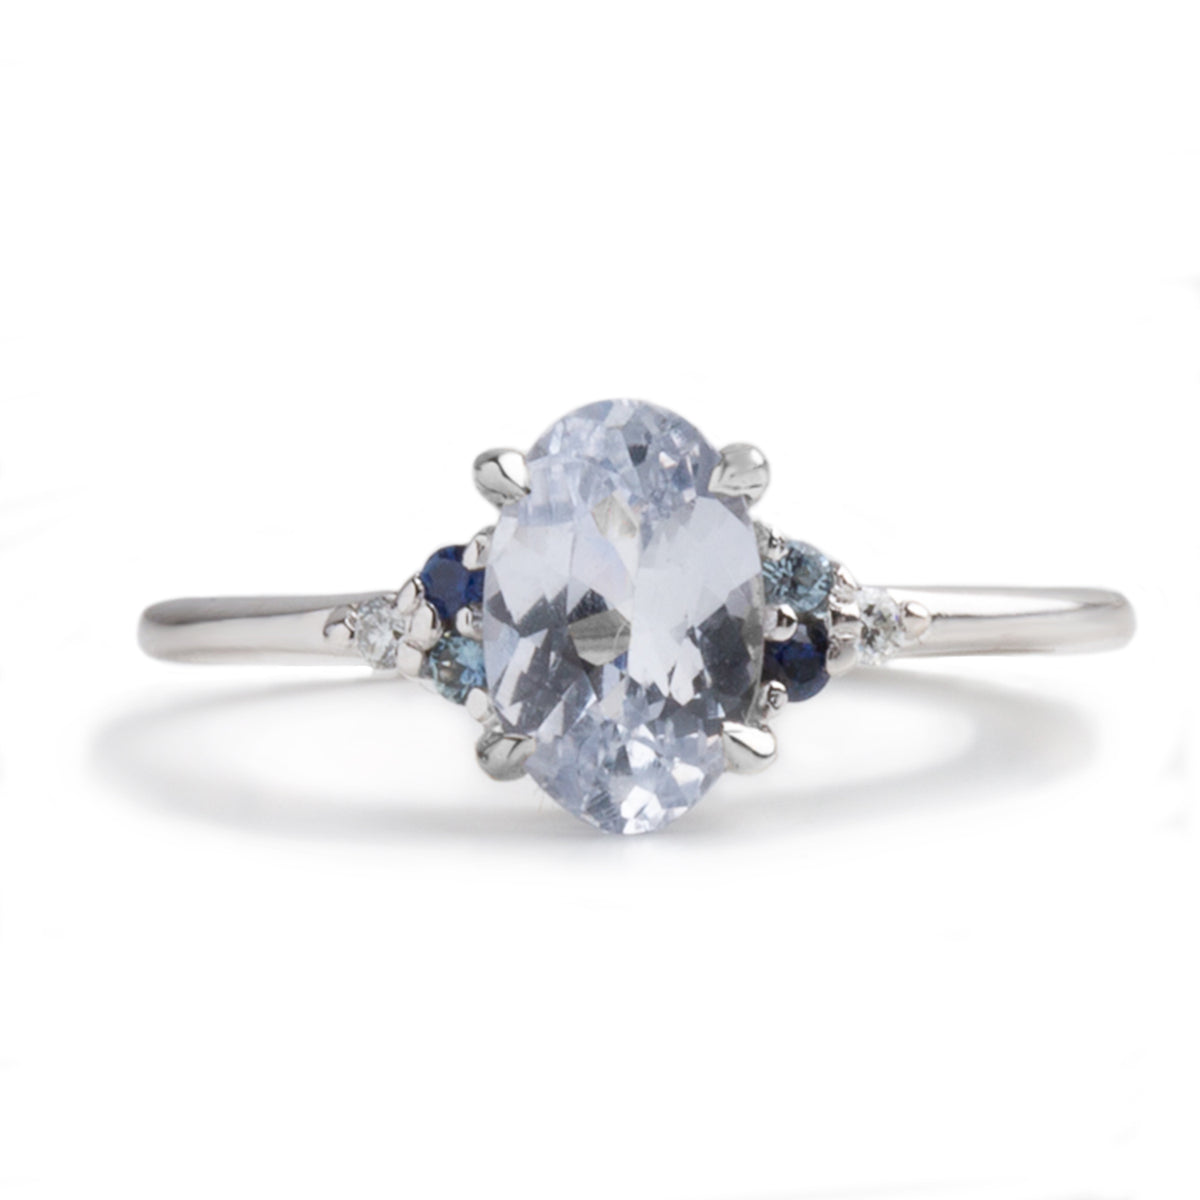 1.35ct oval cut white sapphire with diamond and sapphire side stones 14k white gold engagement ring